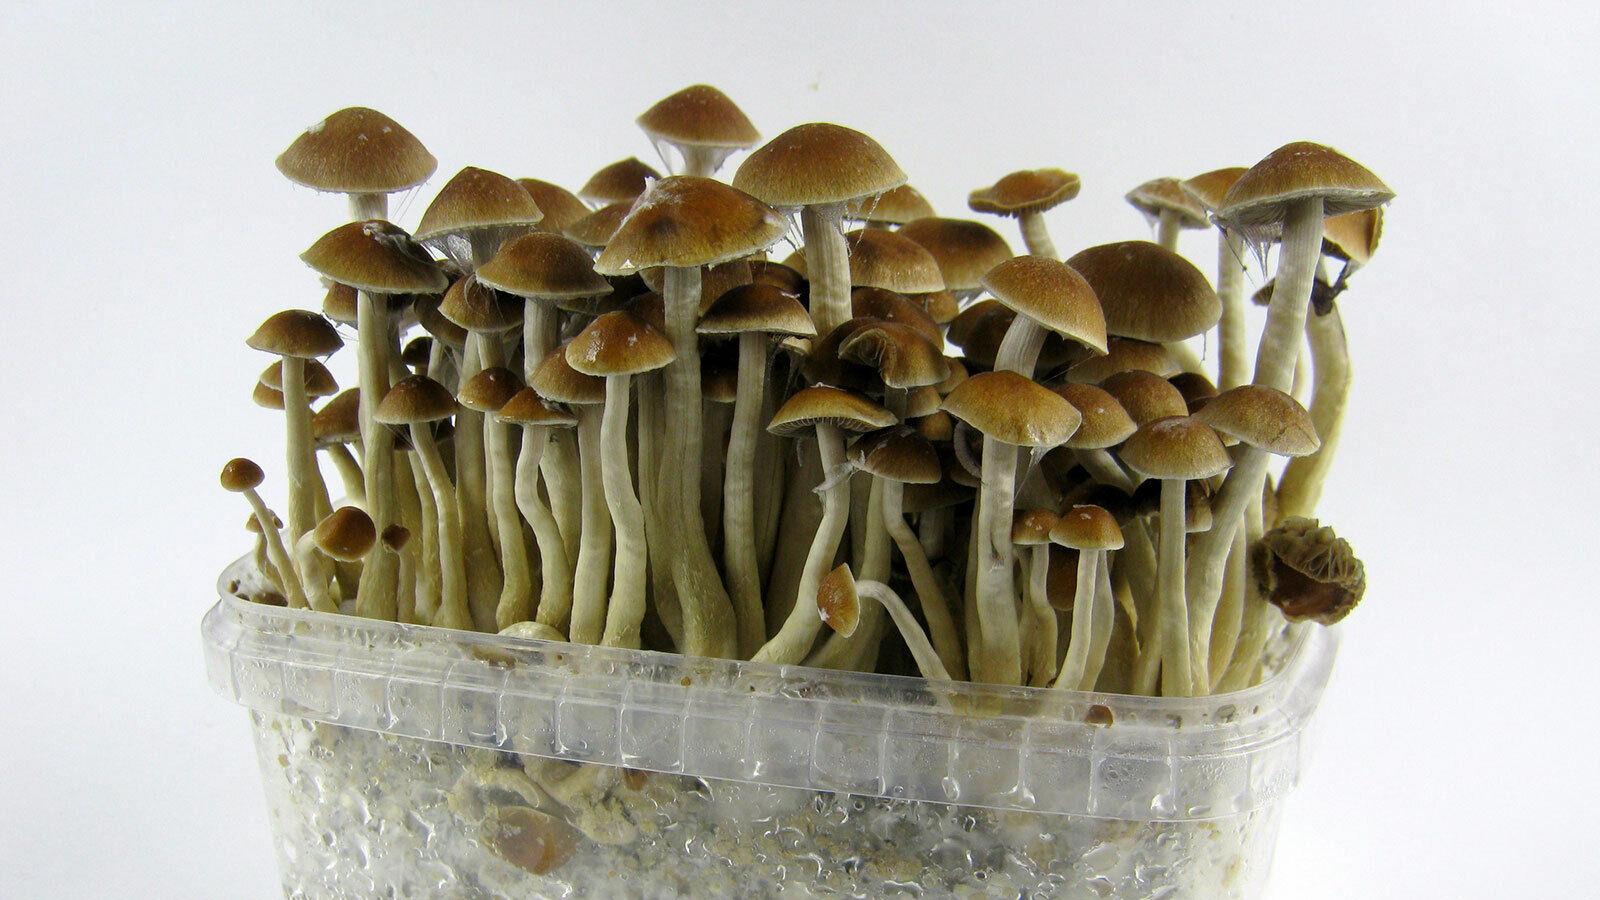 A group of mushrooms in a plastic container

Description automatically generated